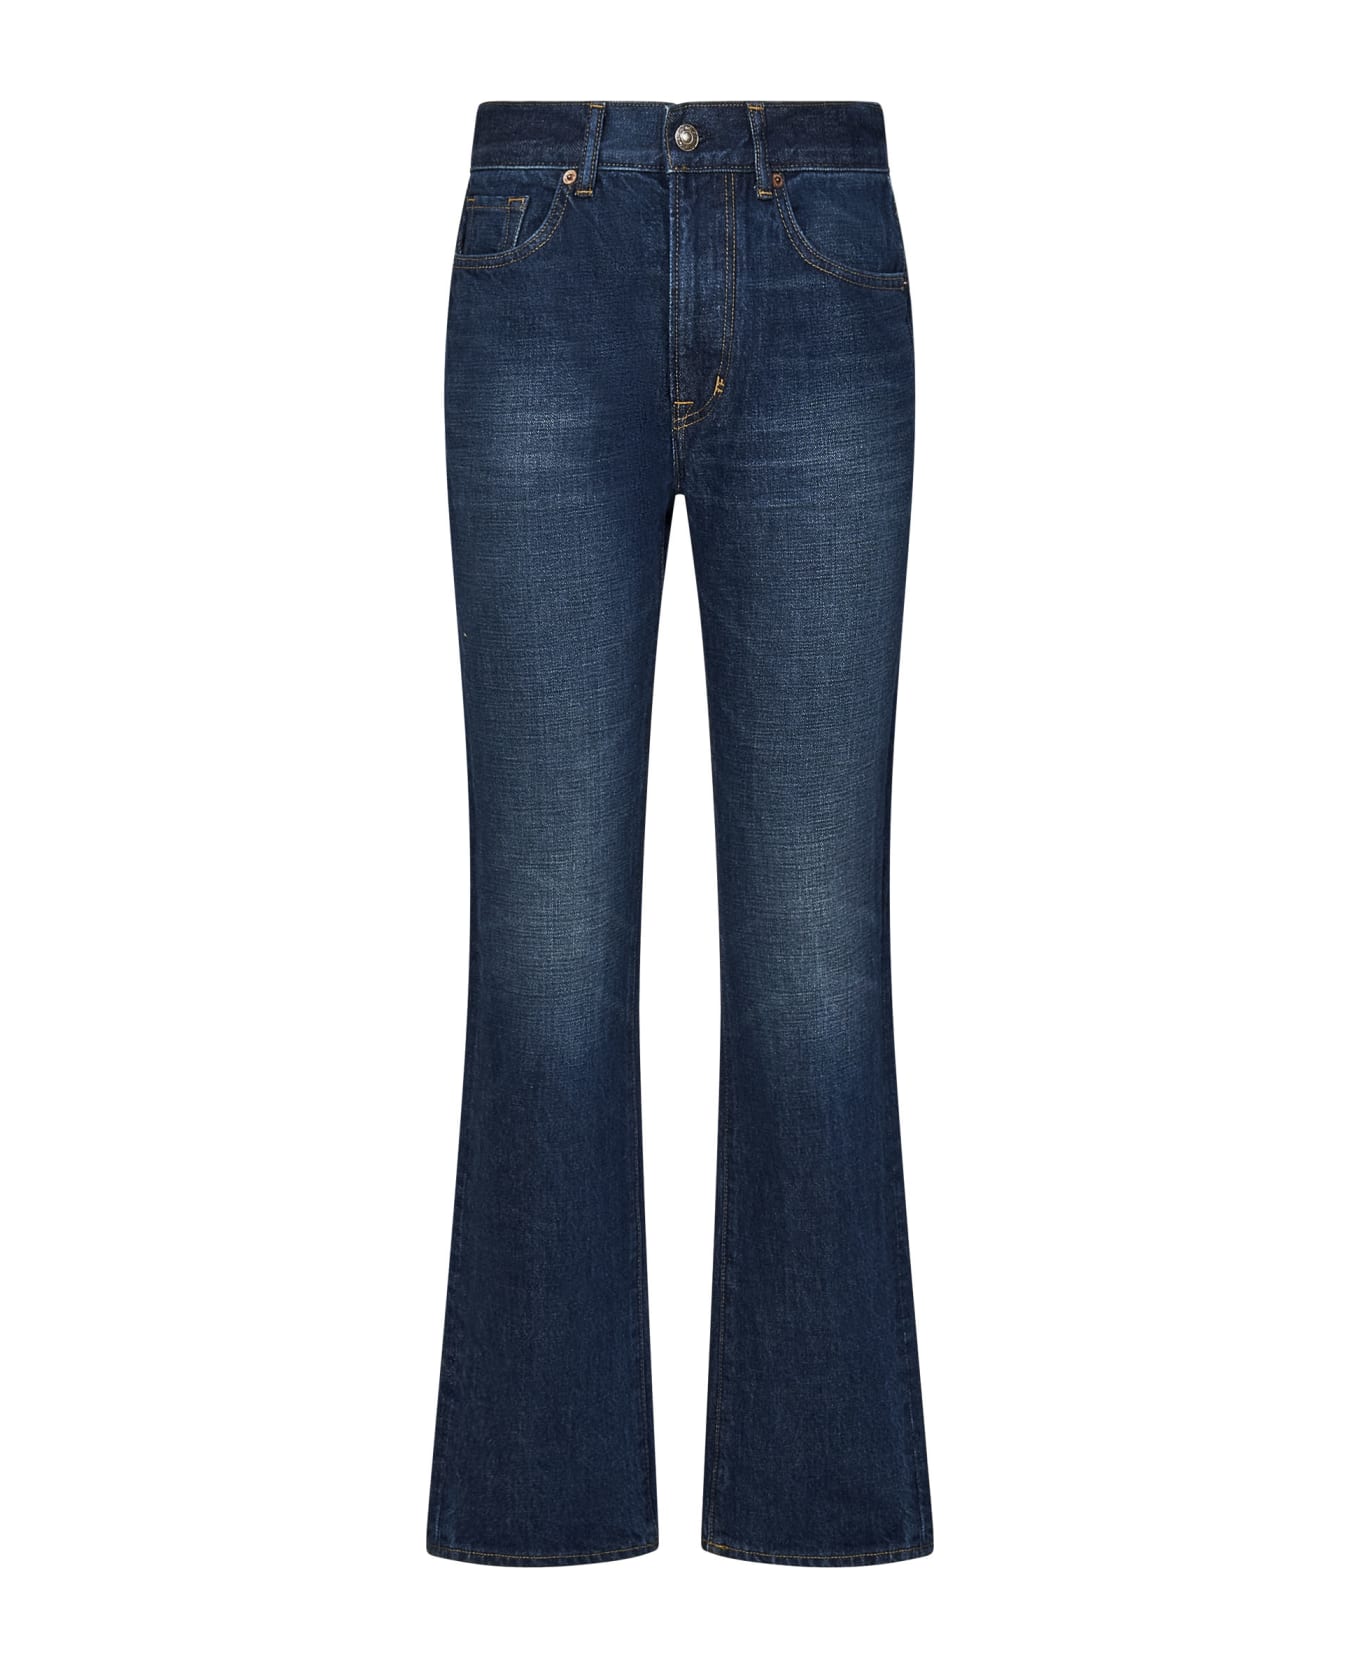 Tom Ford Jeans - MID BLUE